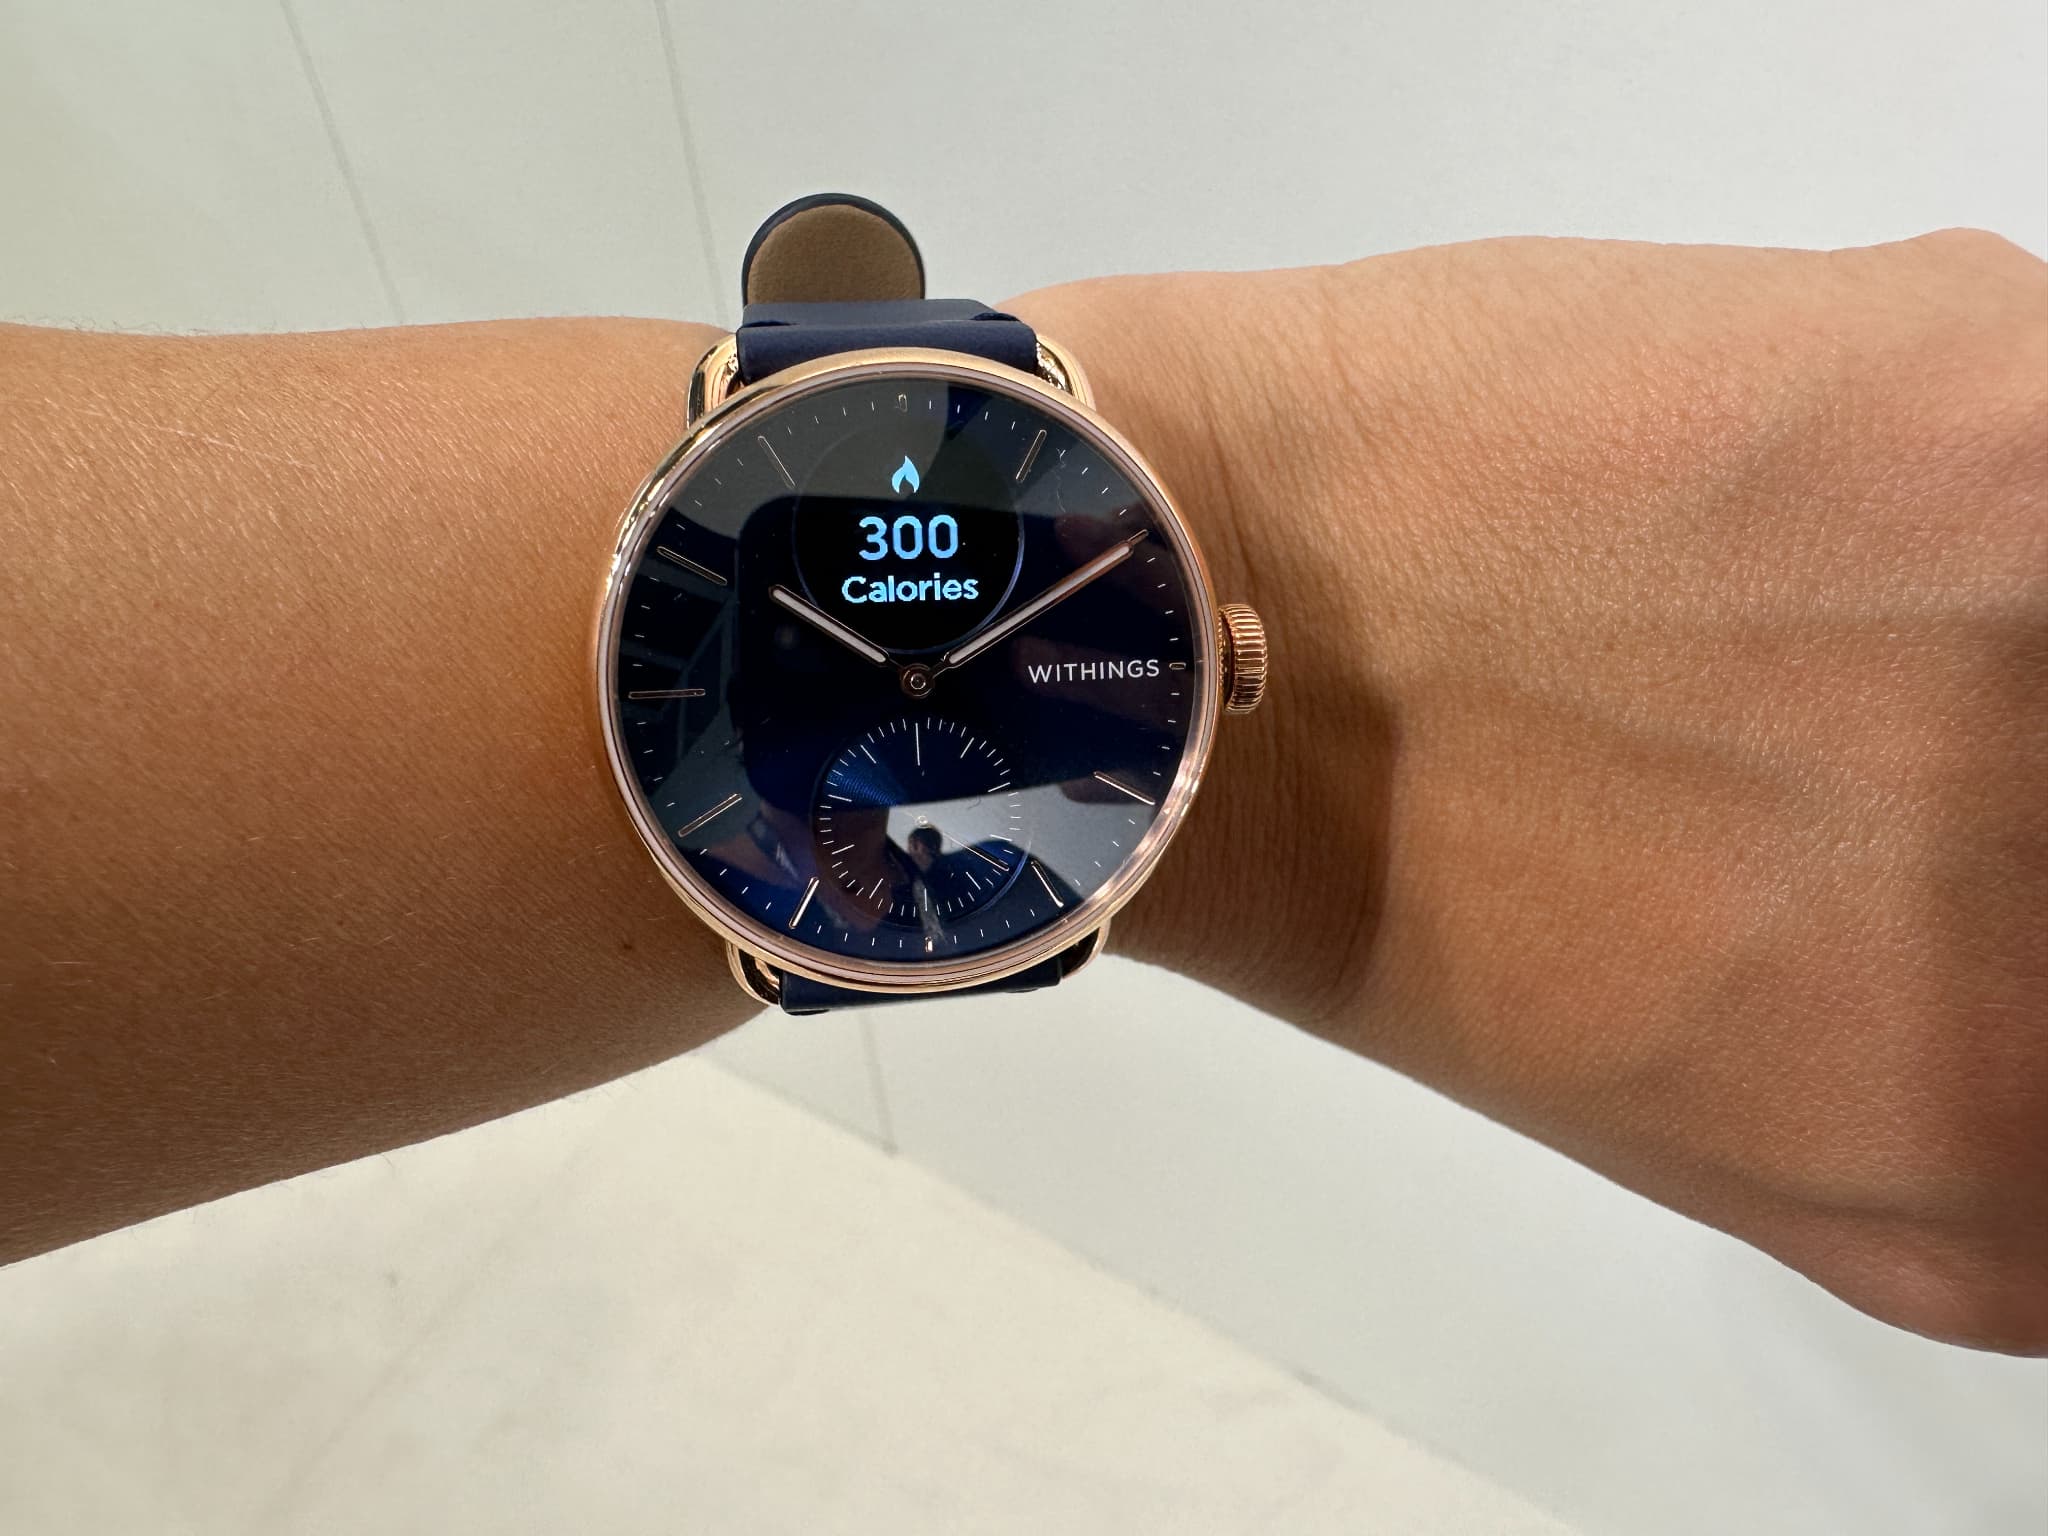 Montre Connectée Hybride, ScanWatch 2 Withings - Cadran 38mm Noir